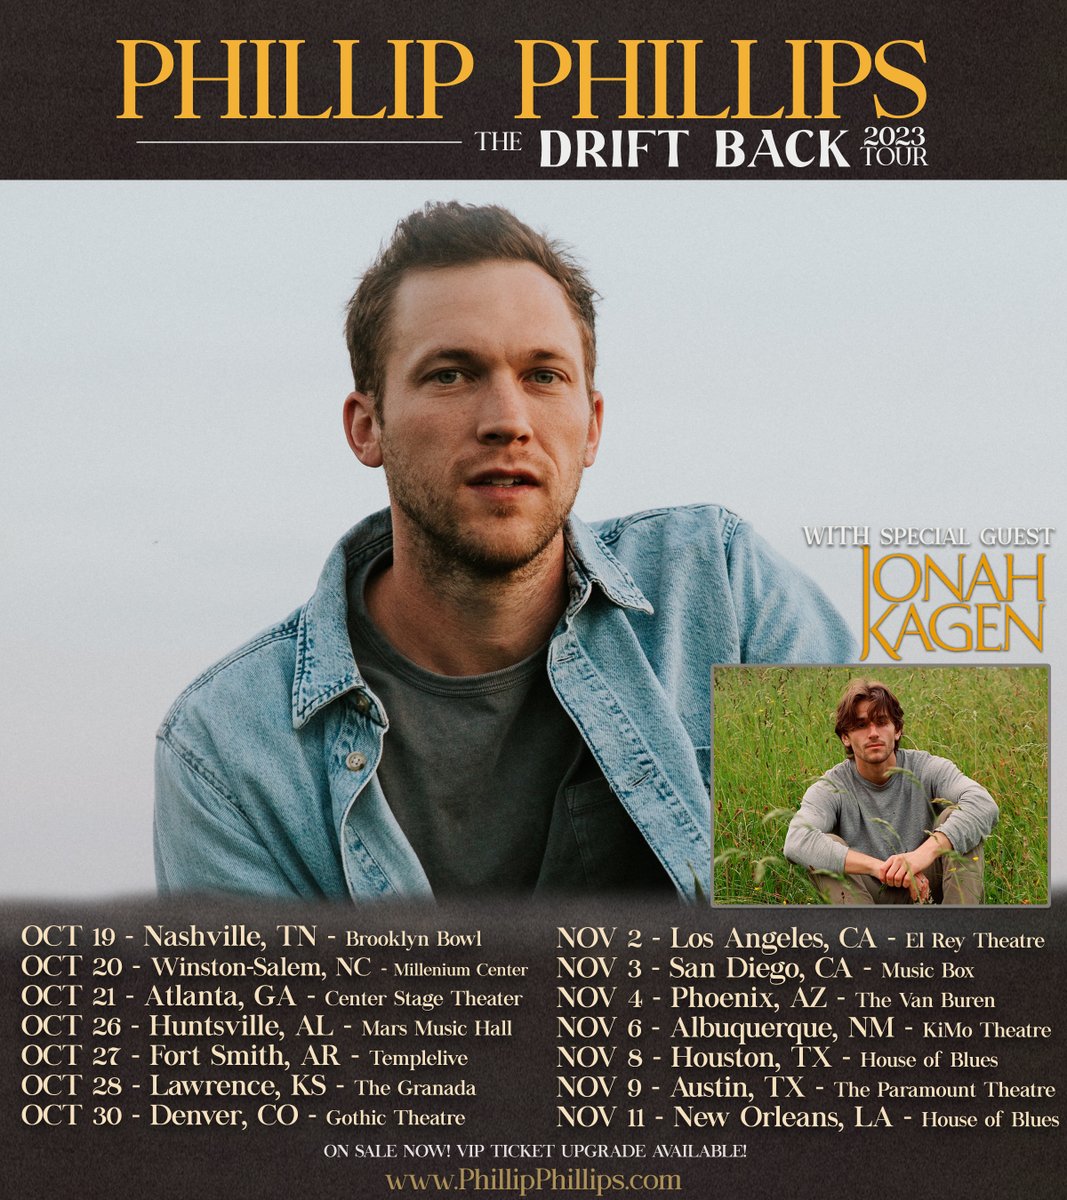 Just when you thought the Drift Back Tour couldn’t get any better…I’ve added in support from some amazingly talented artists who I’ve become fans of! Please welcome @JonahKagen, @abbyhollidayz & @betchaband to the lineup🌟 Grab tickets at phillipphillips.com/tour!